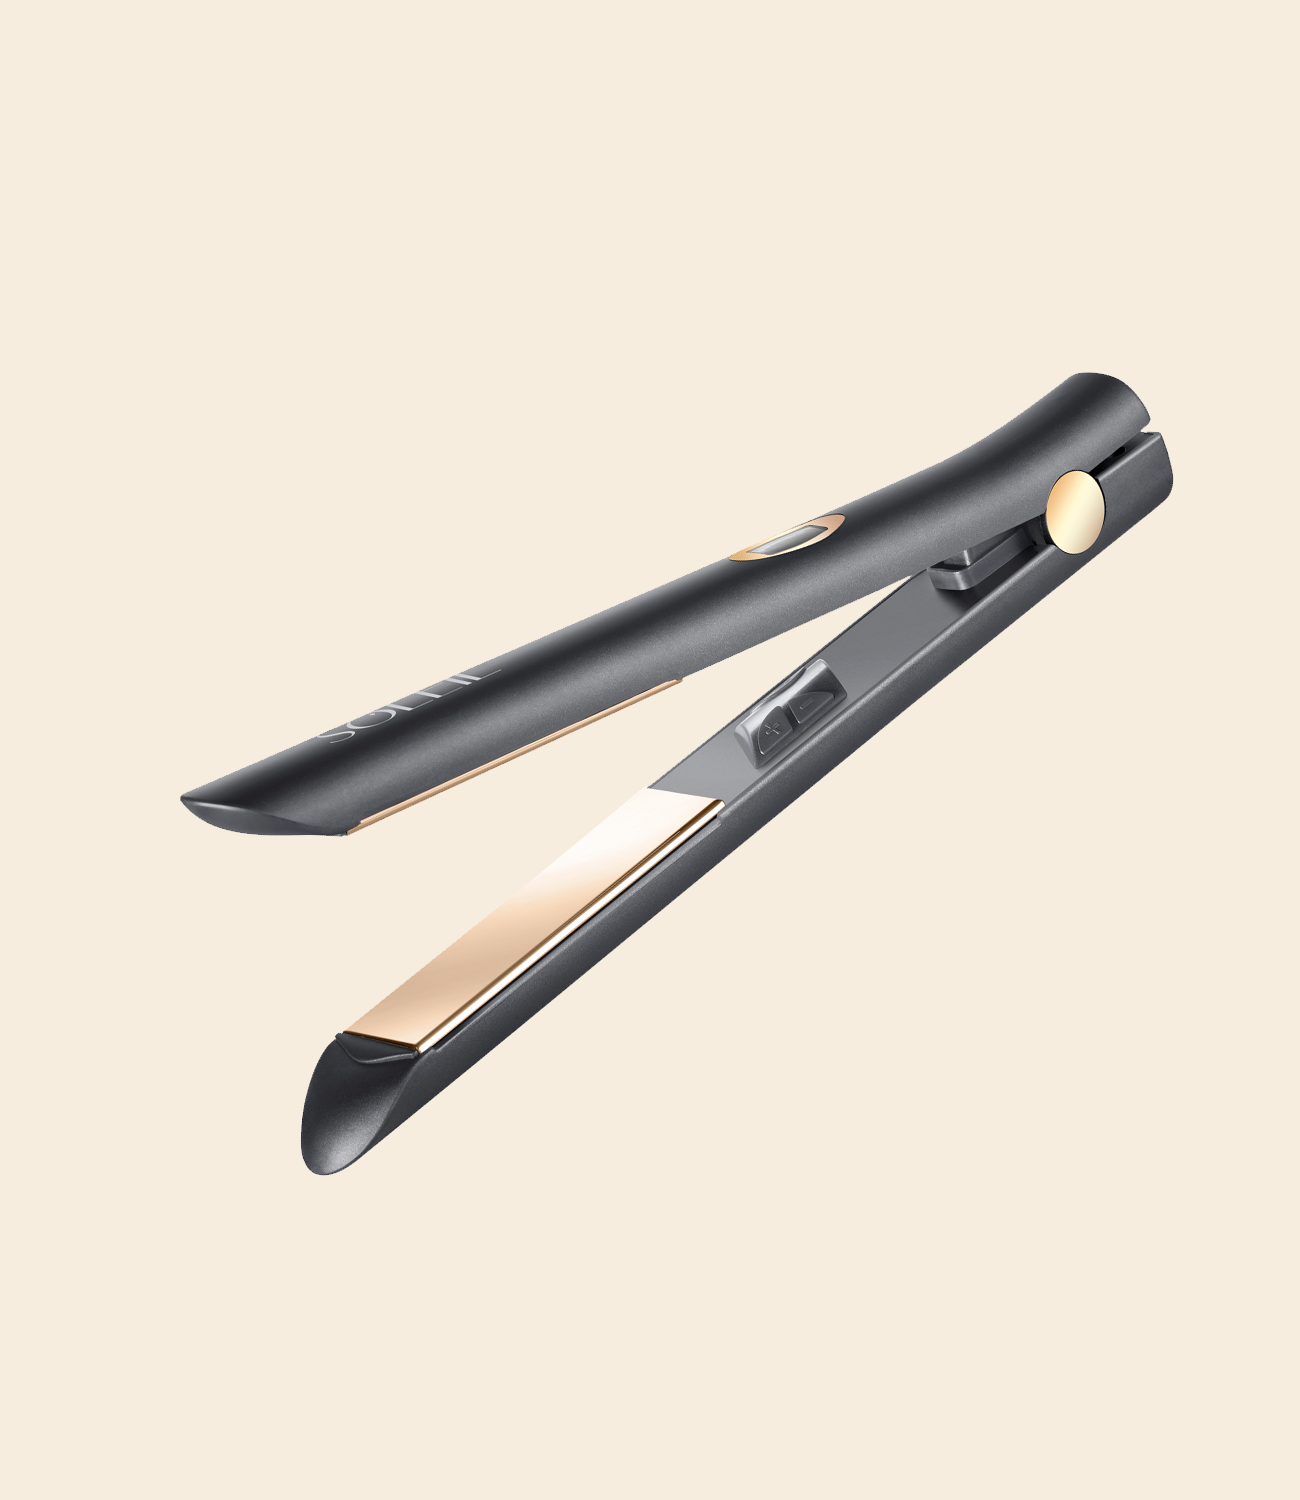 soleil black Infrared flat iron with gold color plates and detail against a light beige background